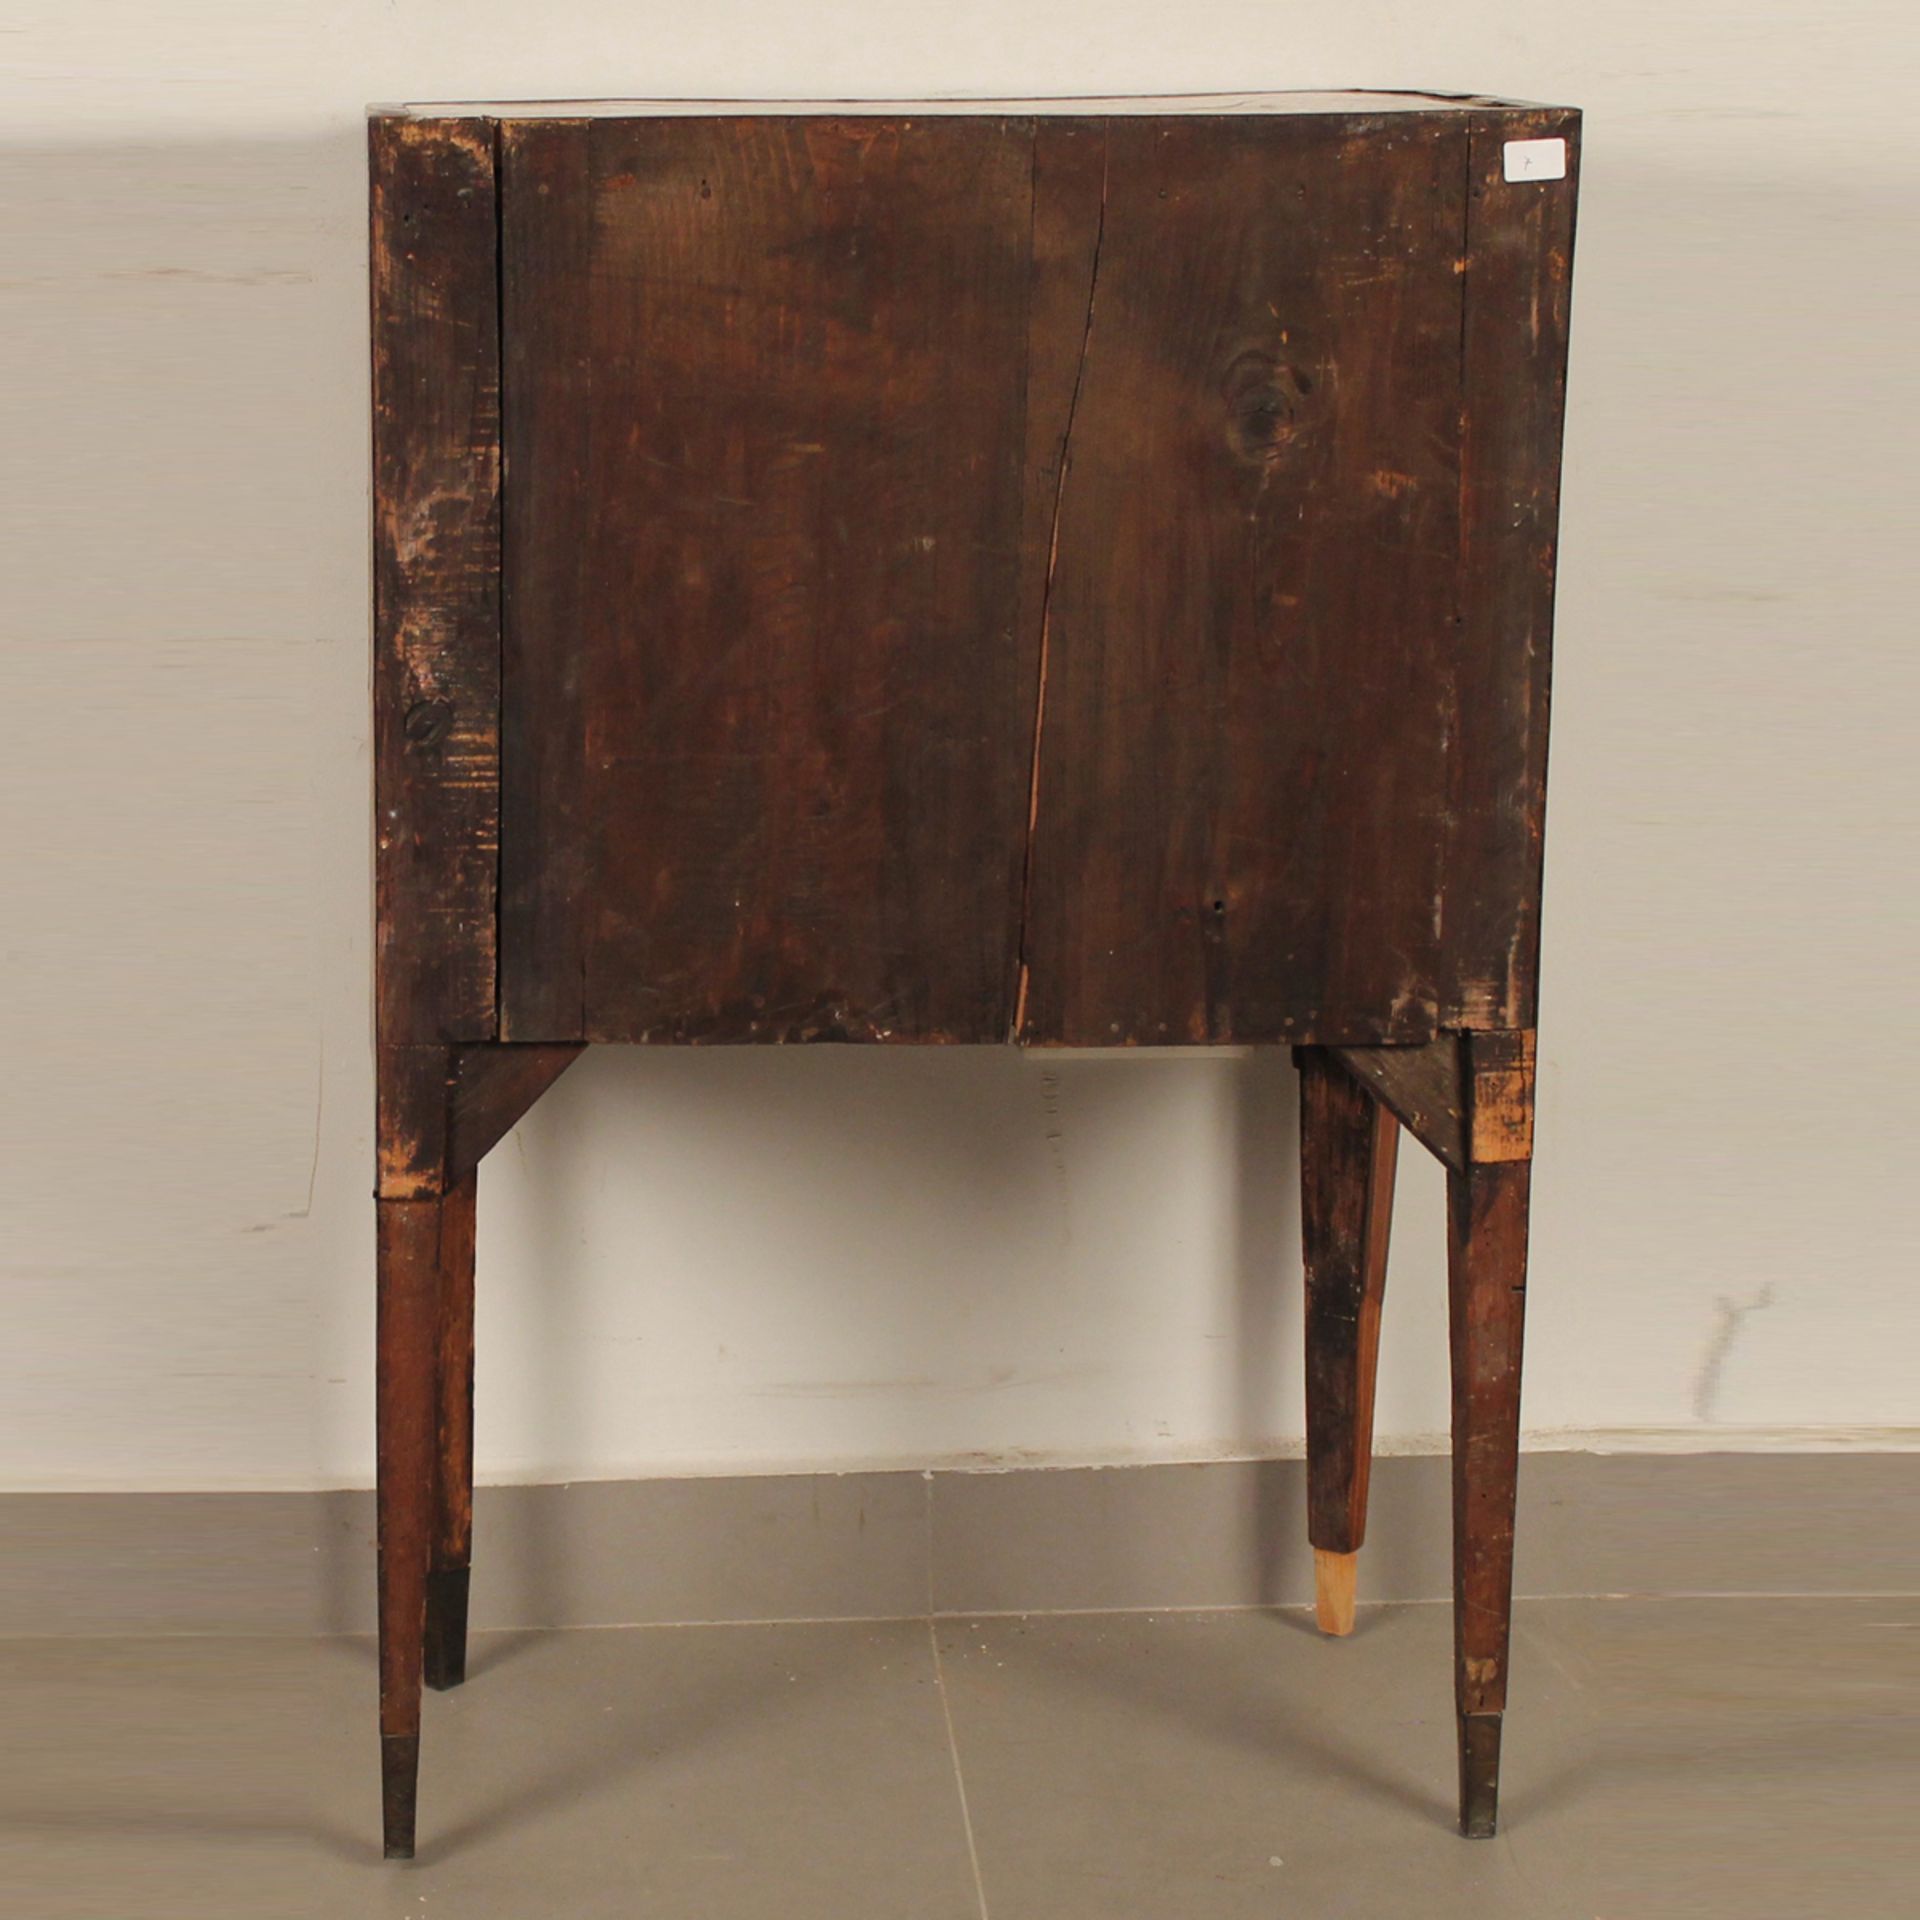 Comodino a due cassetti - Bedside table with two drawers - Image 2 of 2